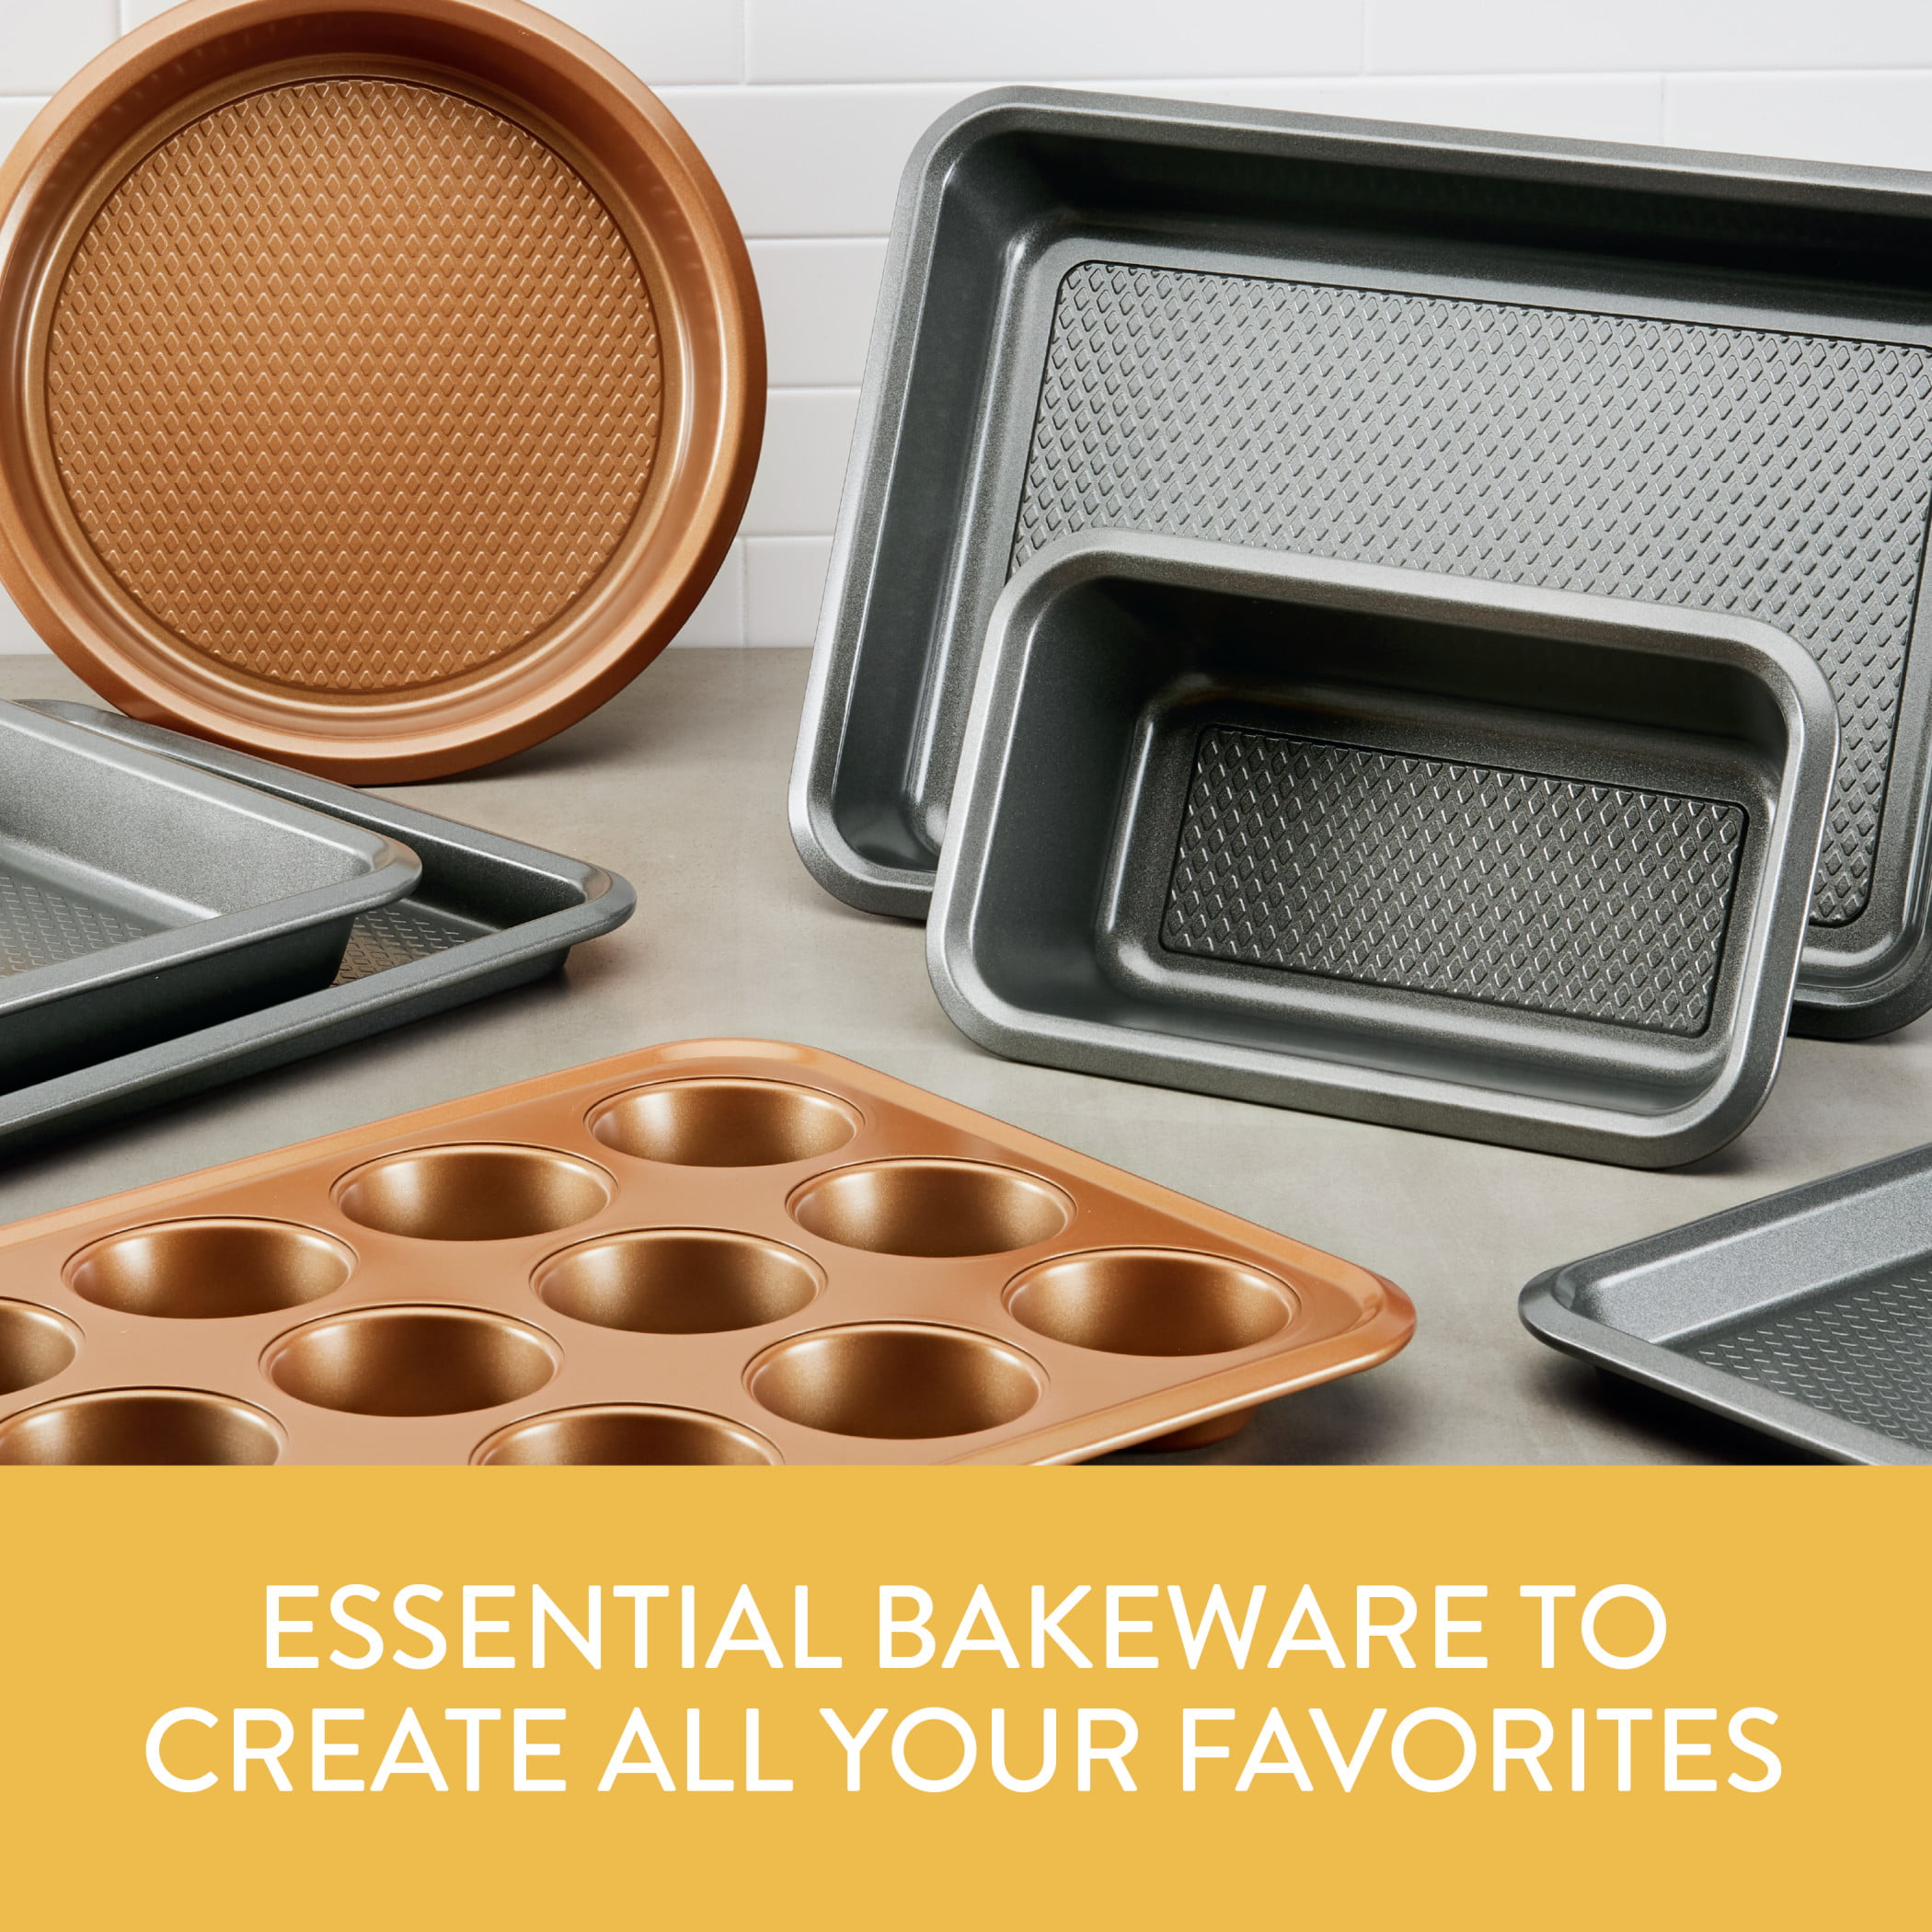 Your complete guide to baking pans